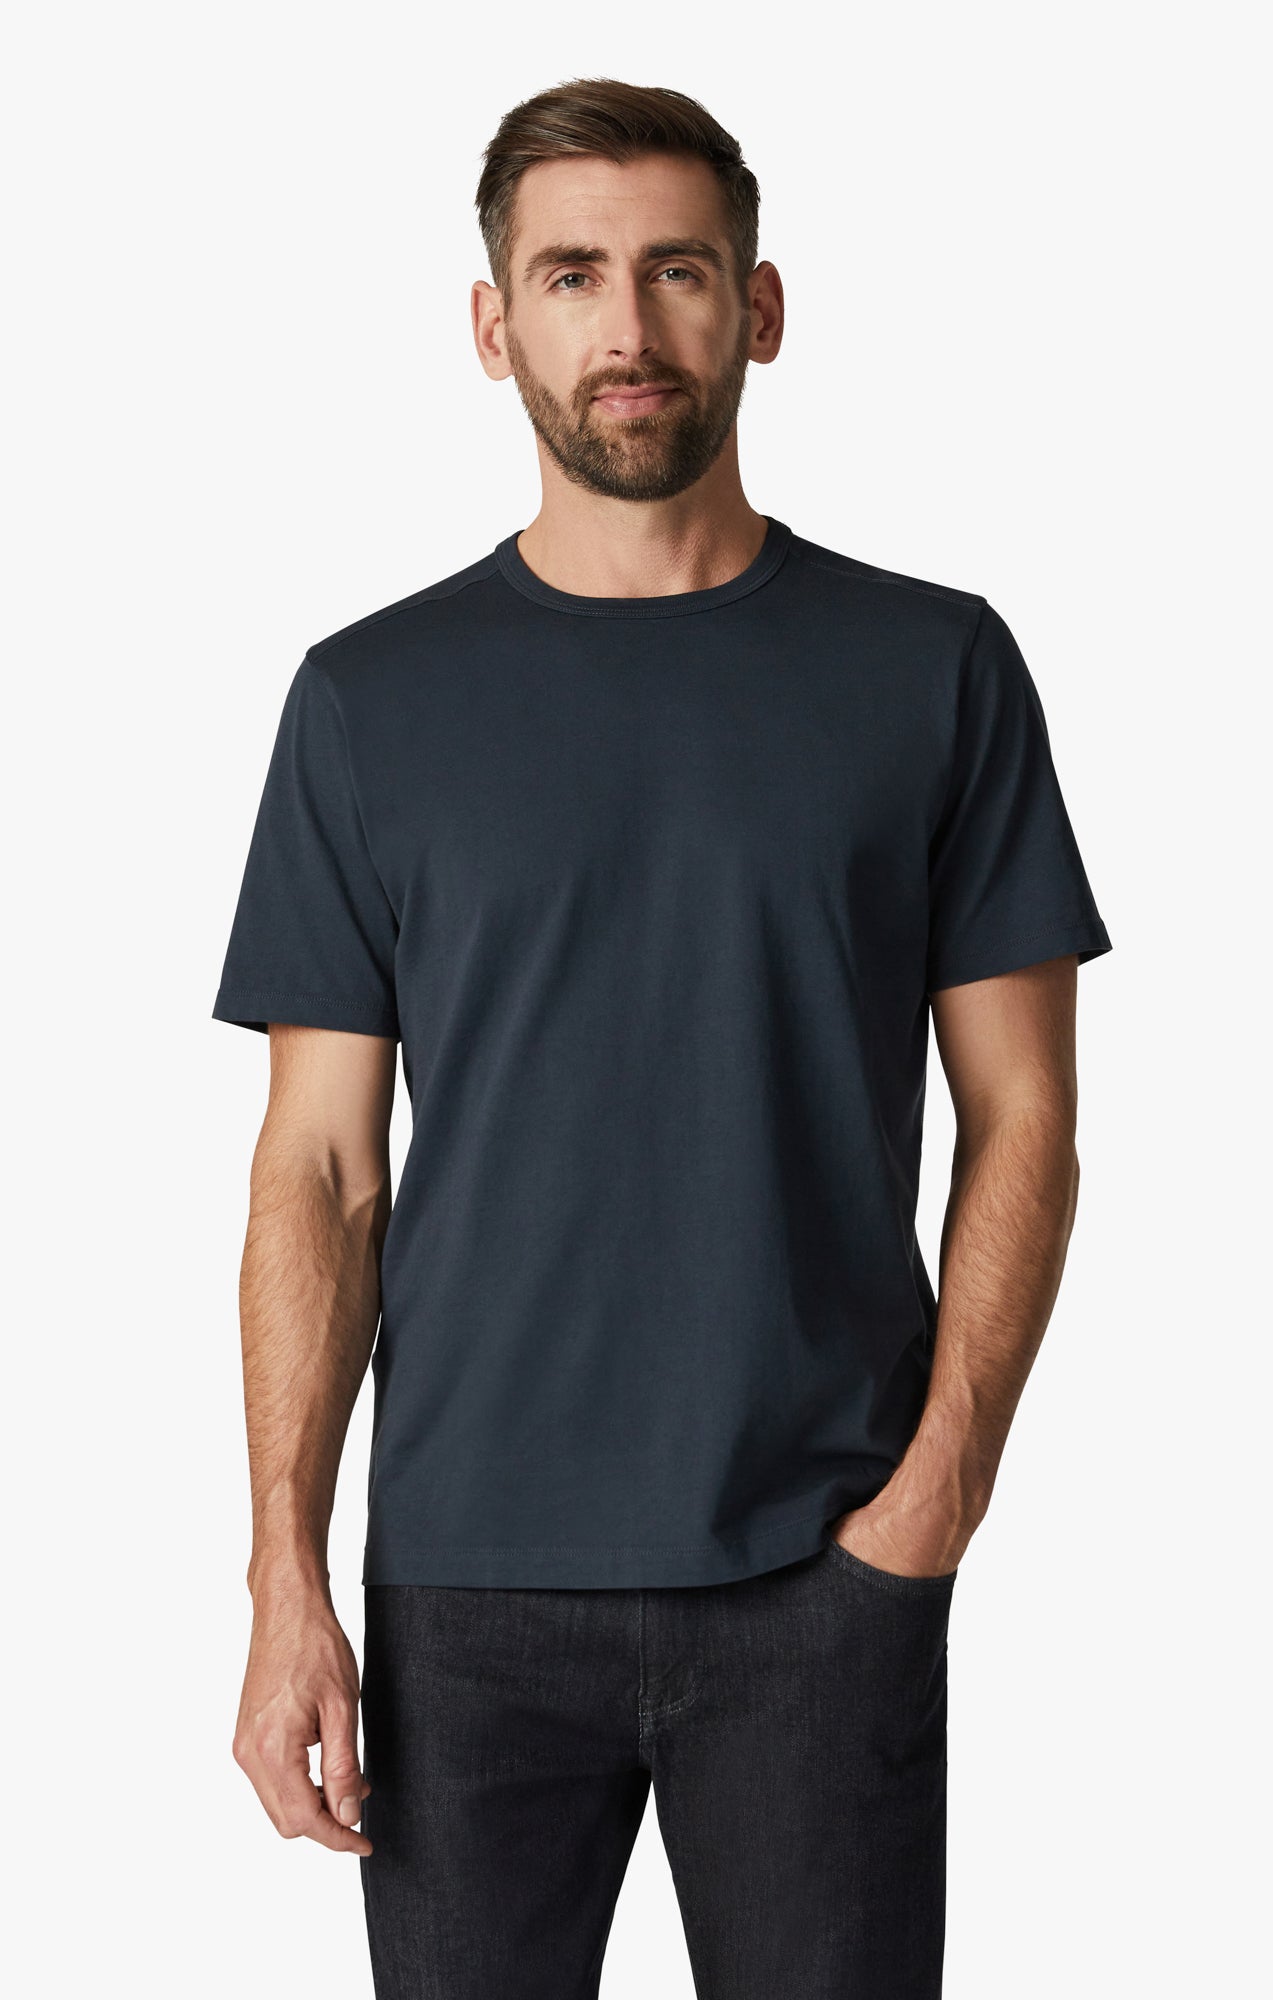 Basic Crew Neck T-Shirt in Blue Berry Image 1